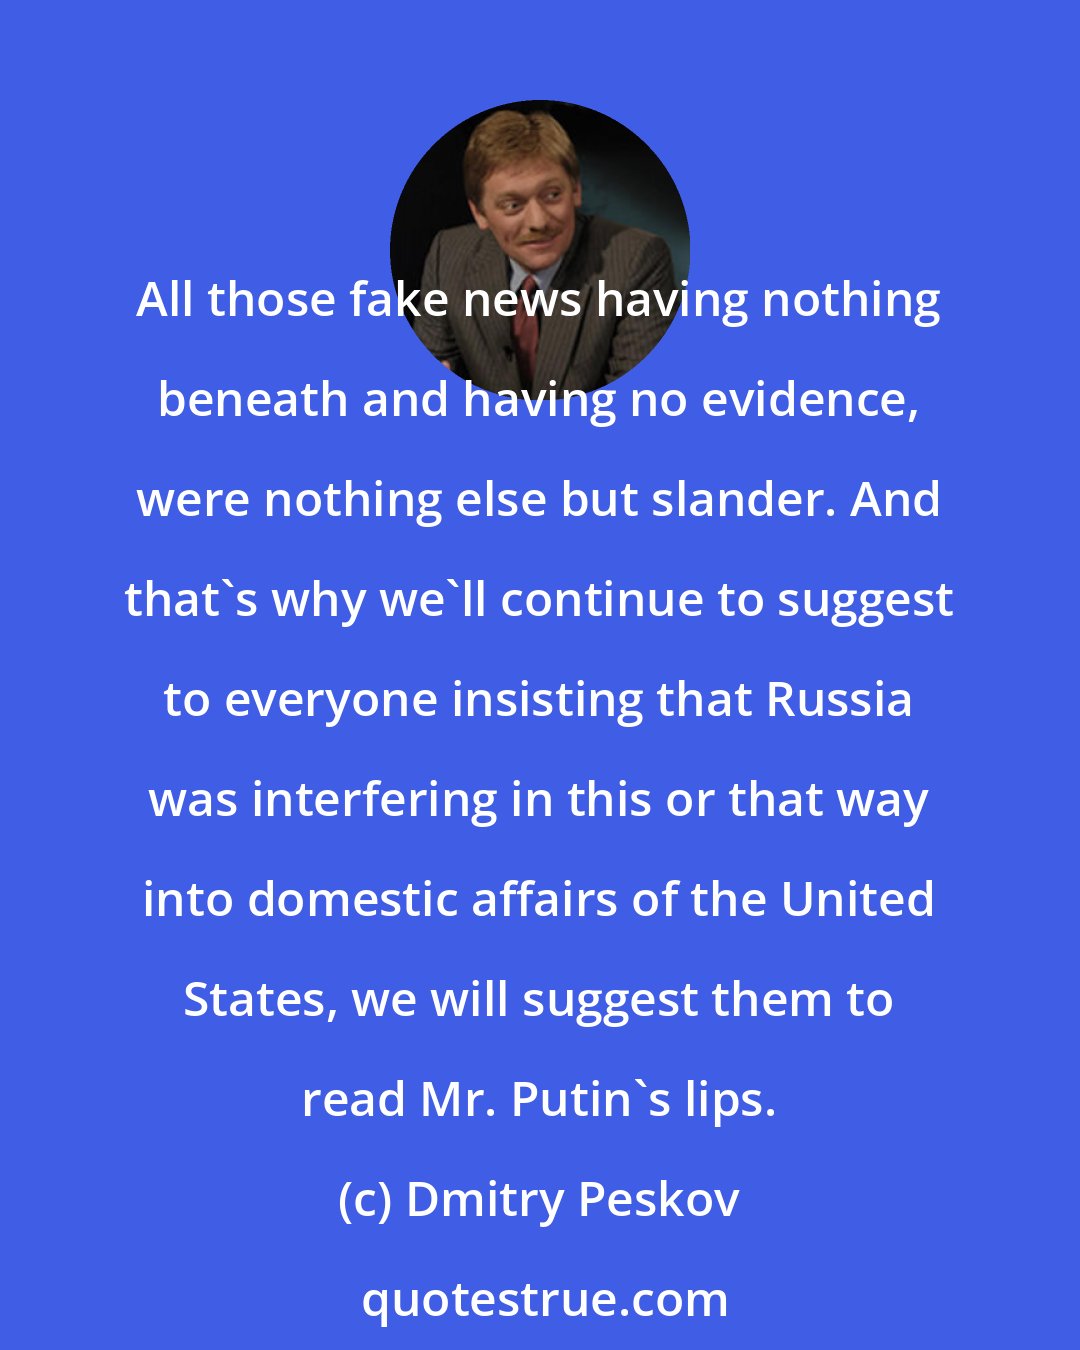 Dmitry Peskov: All those fake news having nothing beneath and having no evidence, were nothing else but slander. And that's why we'll continue to suggest to everyone insisting that Russia was interfering in this or that way into domestic affairs of the United States, we will suggest them to read Mr. Putin's lips.